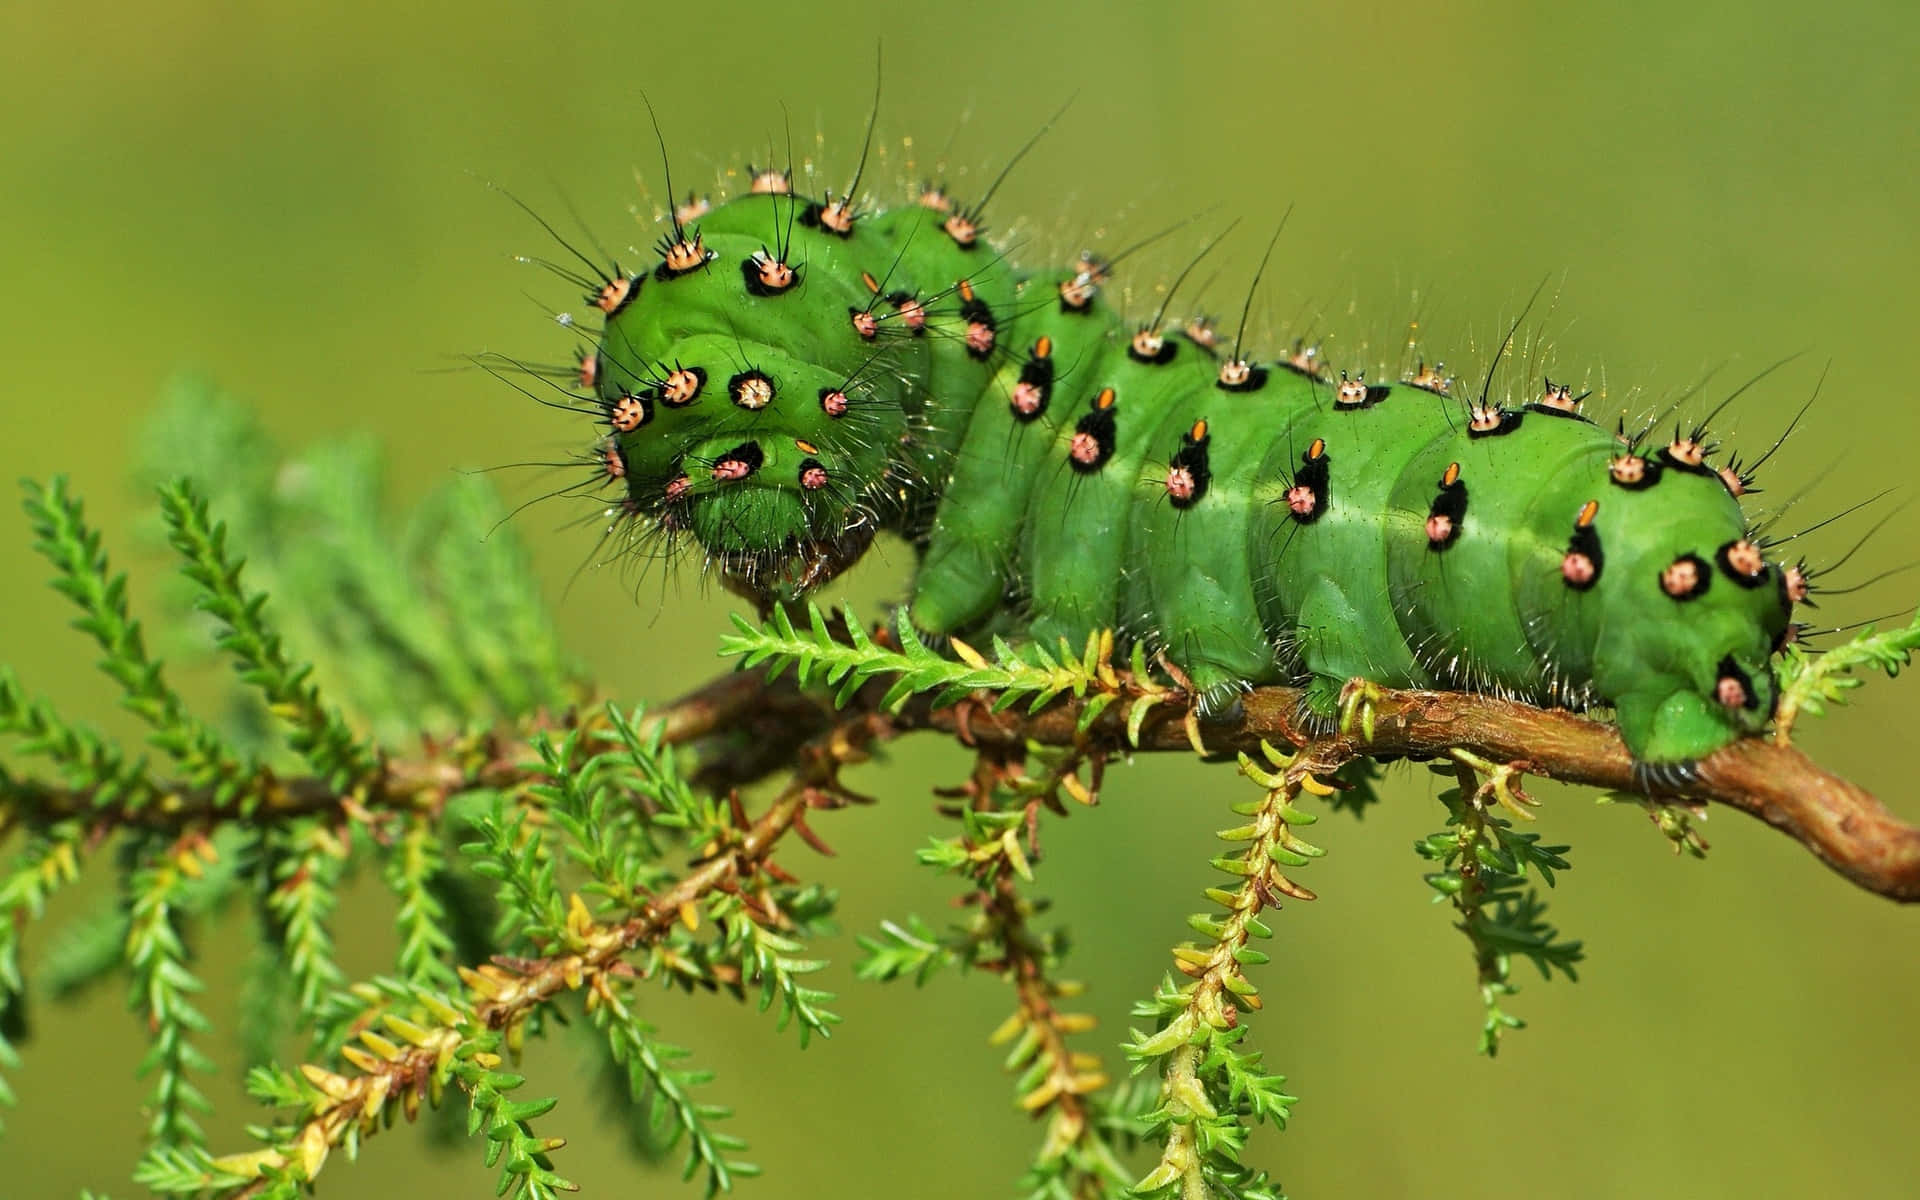 A Green Caterpillar Is Sitting On A Branch